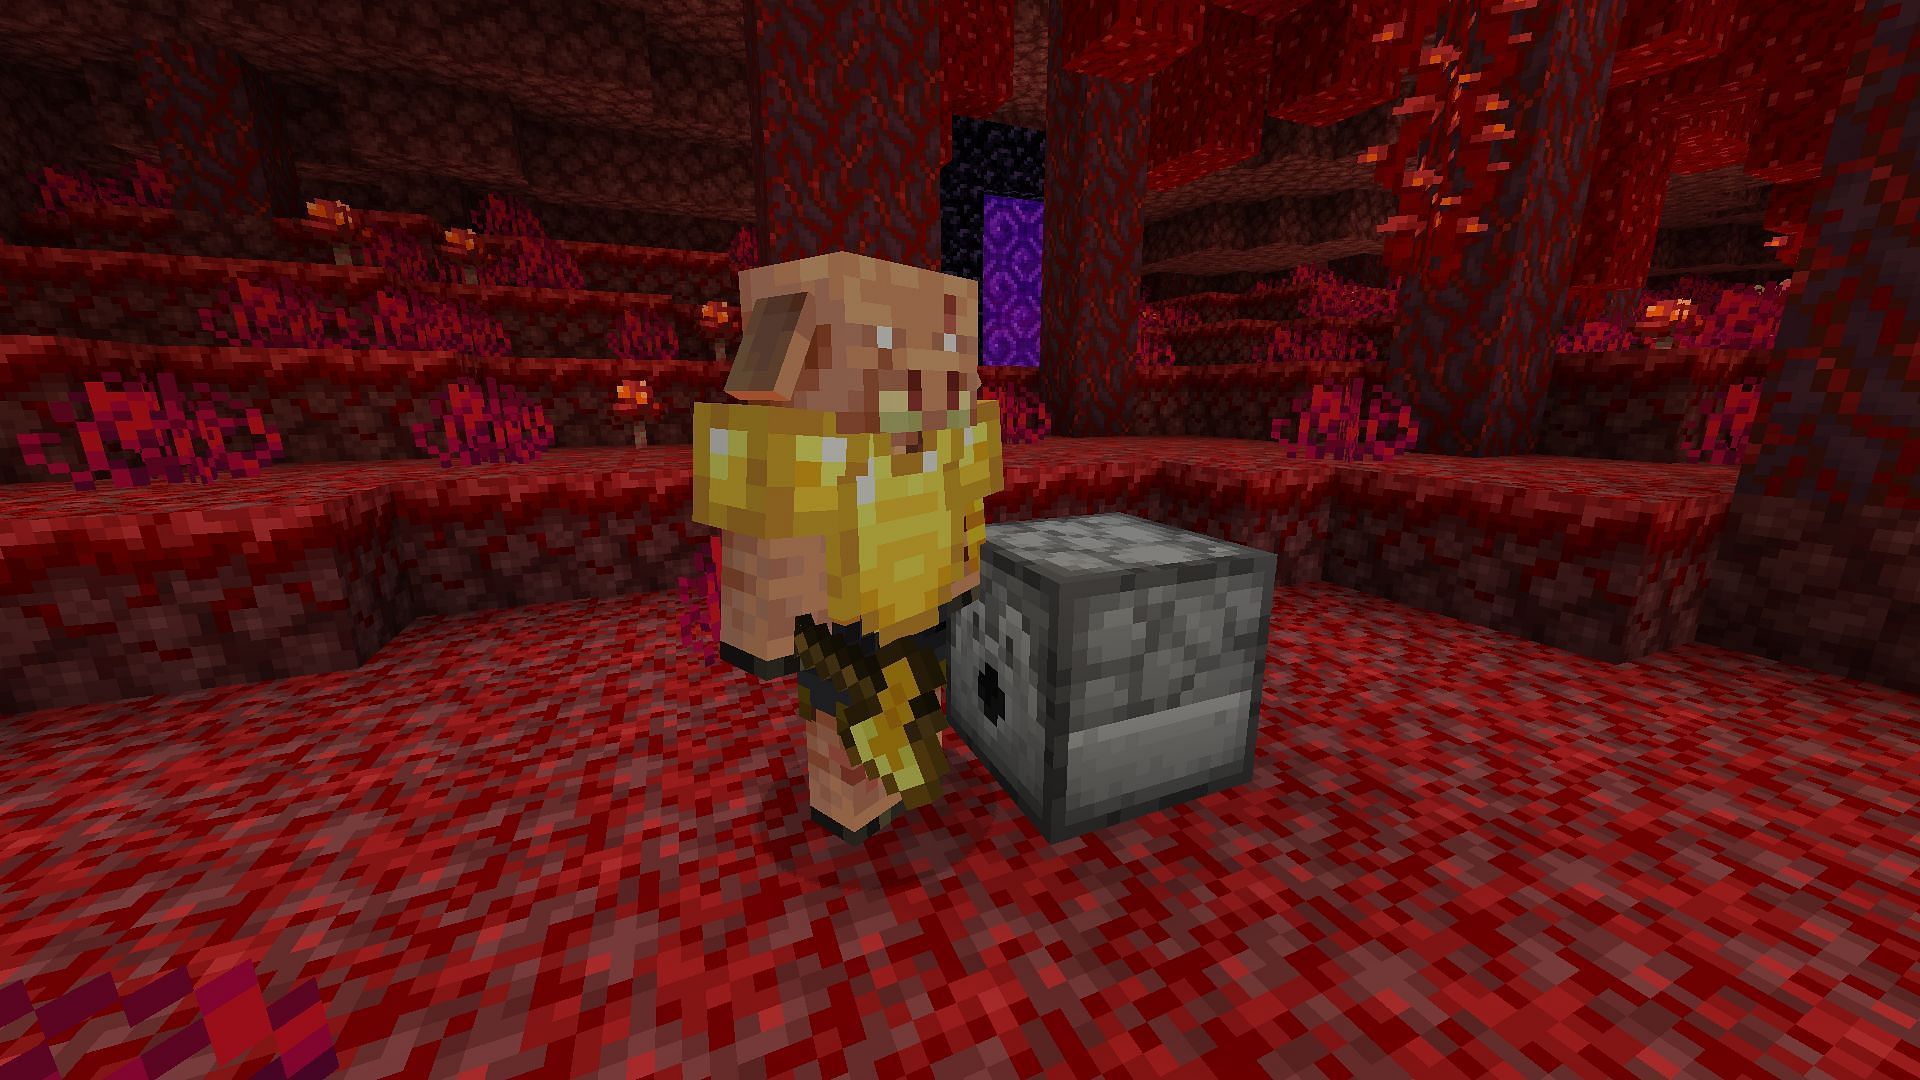 Piglin brutes can only wear armor if ejected from a dispenser or through commands in Minecraft (Image via Mojang)